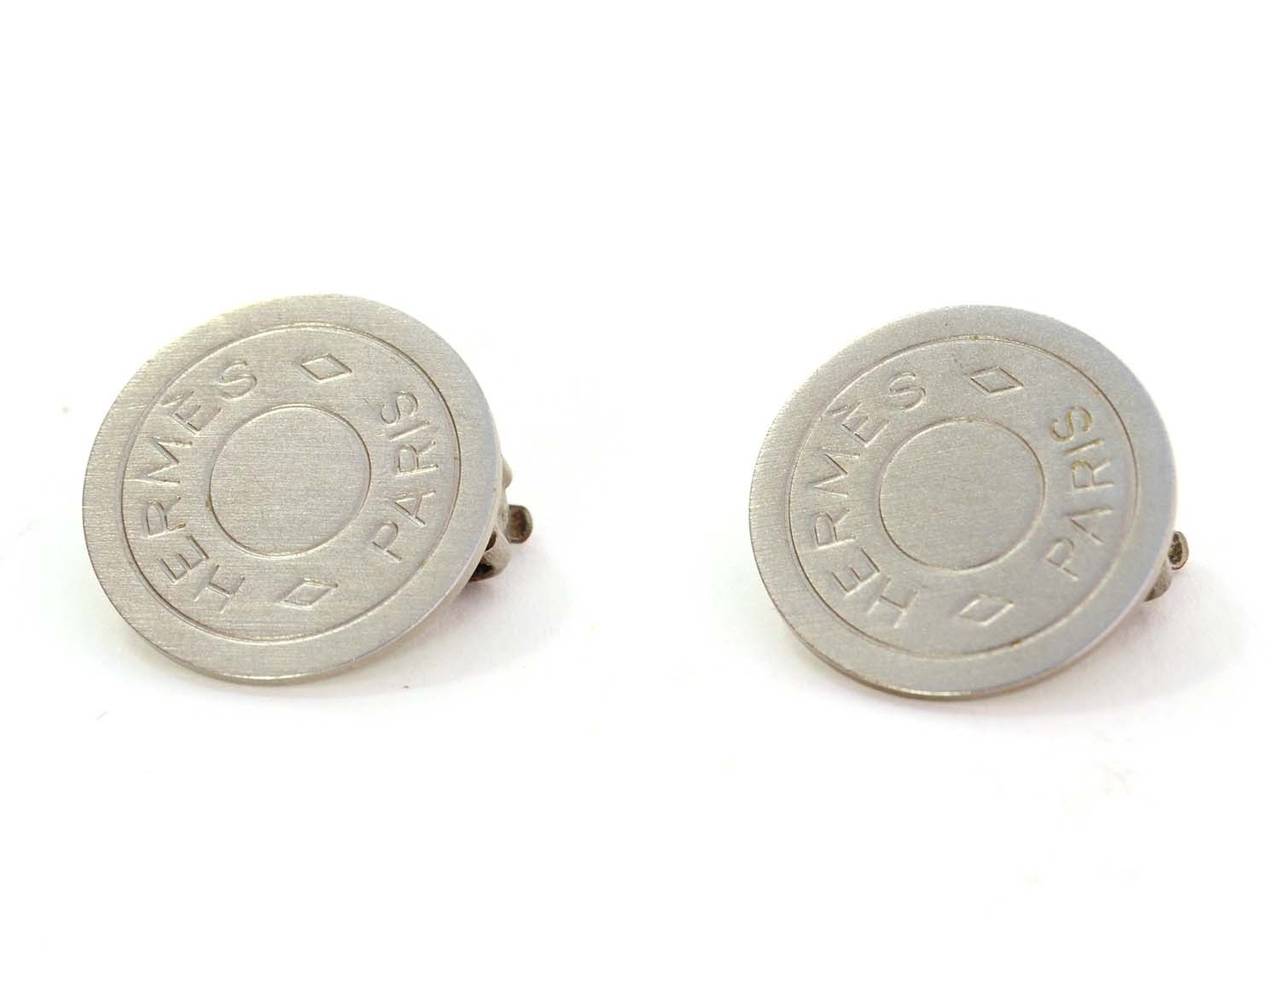 Hermes Silver Disc Clip On Earrings
Features 